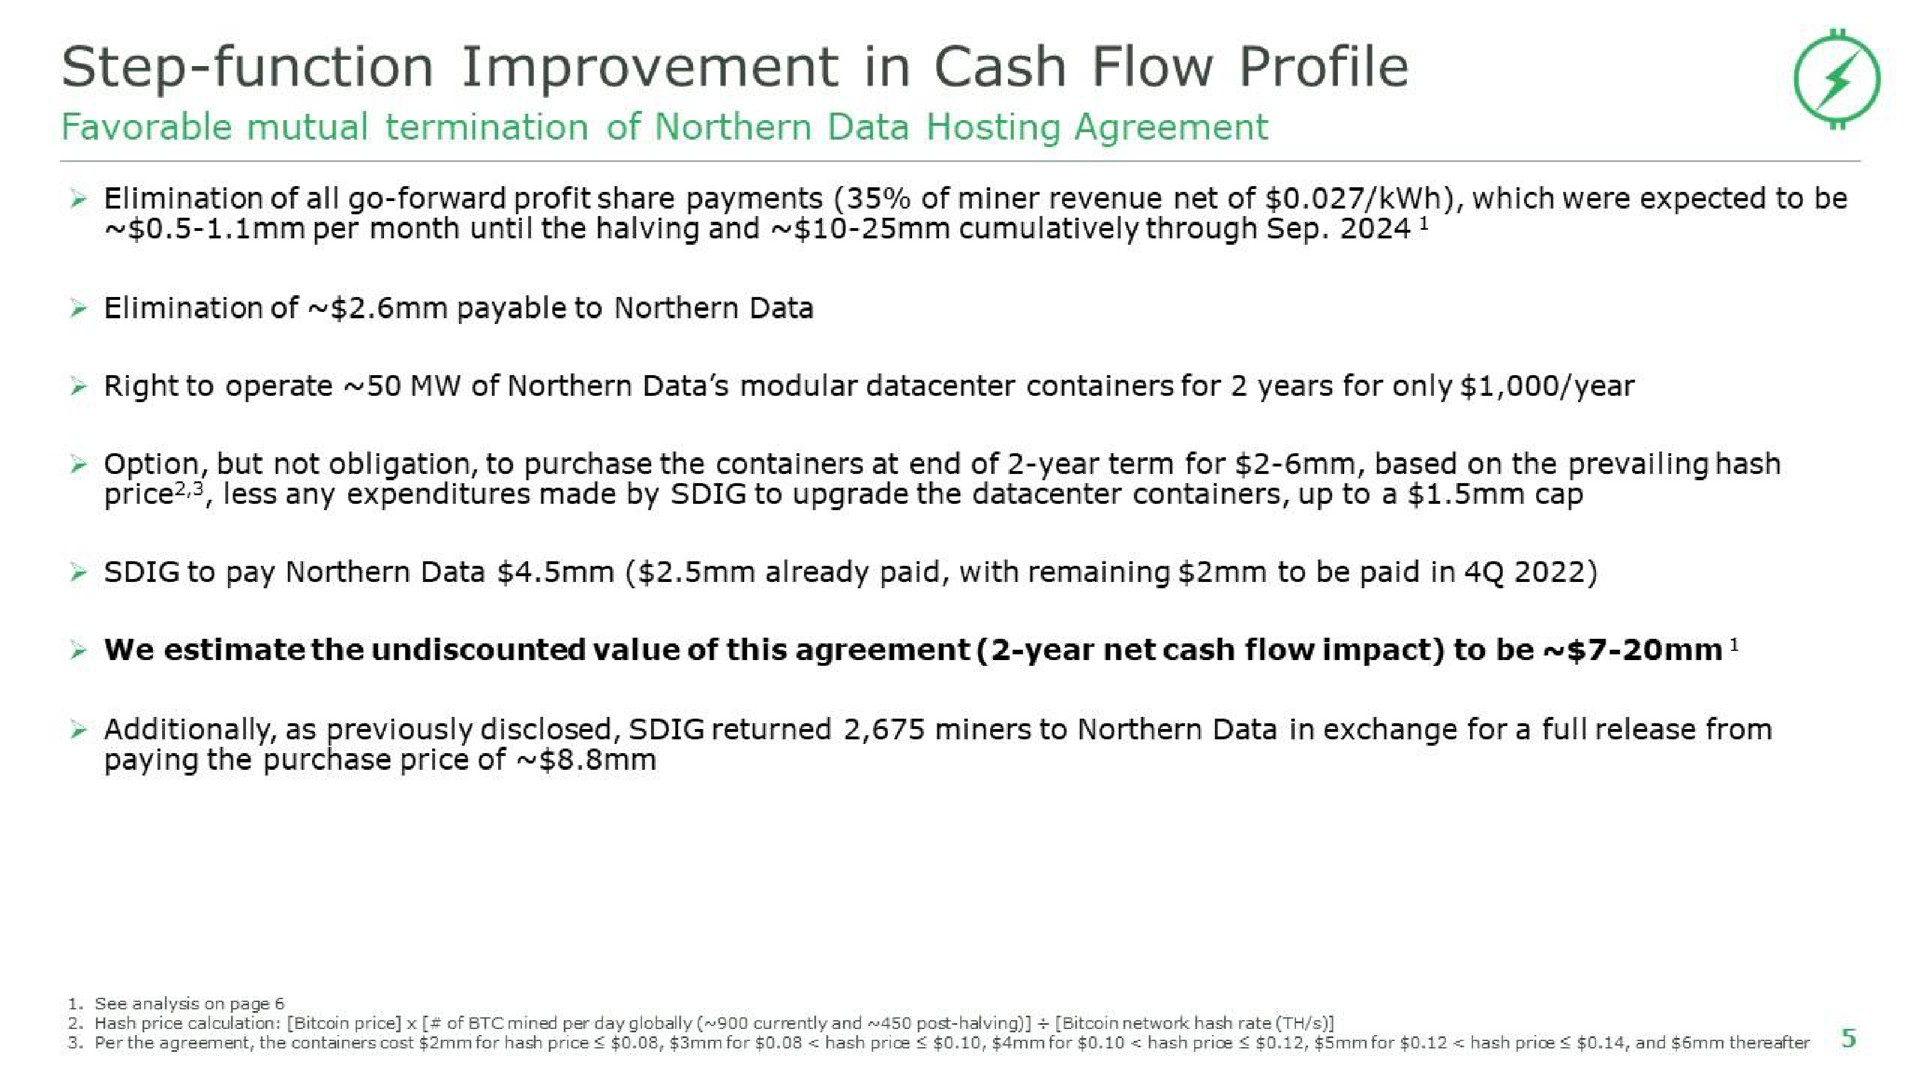 step function improvement in cash flow profile | Stronghold Digital Mining